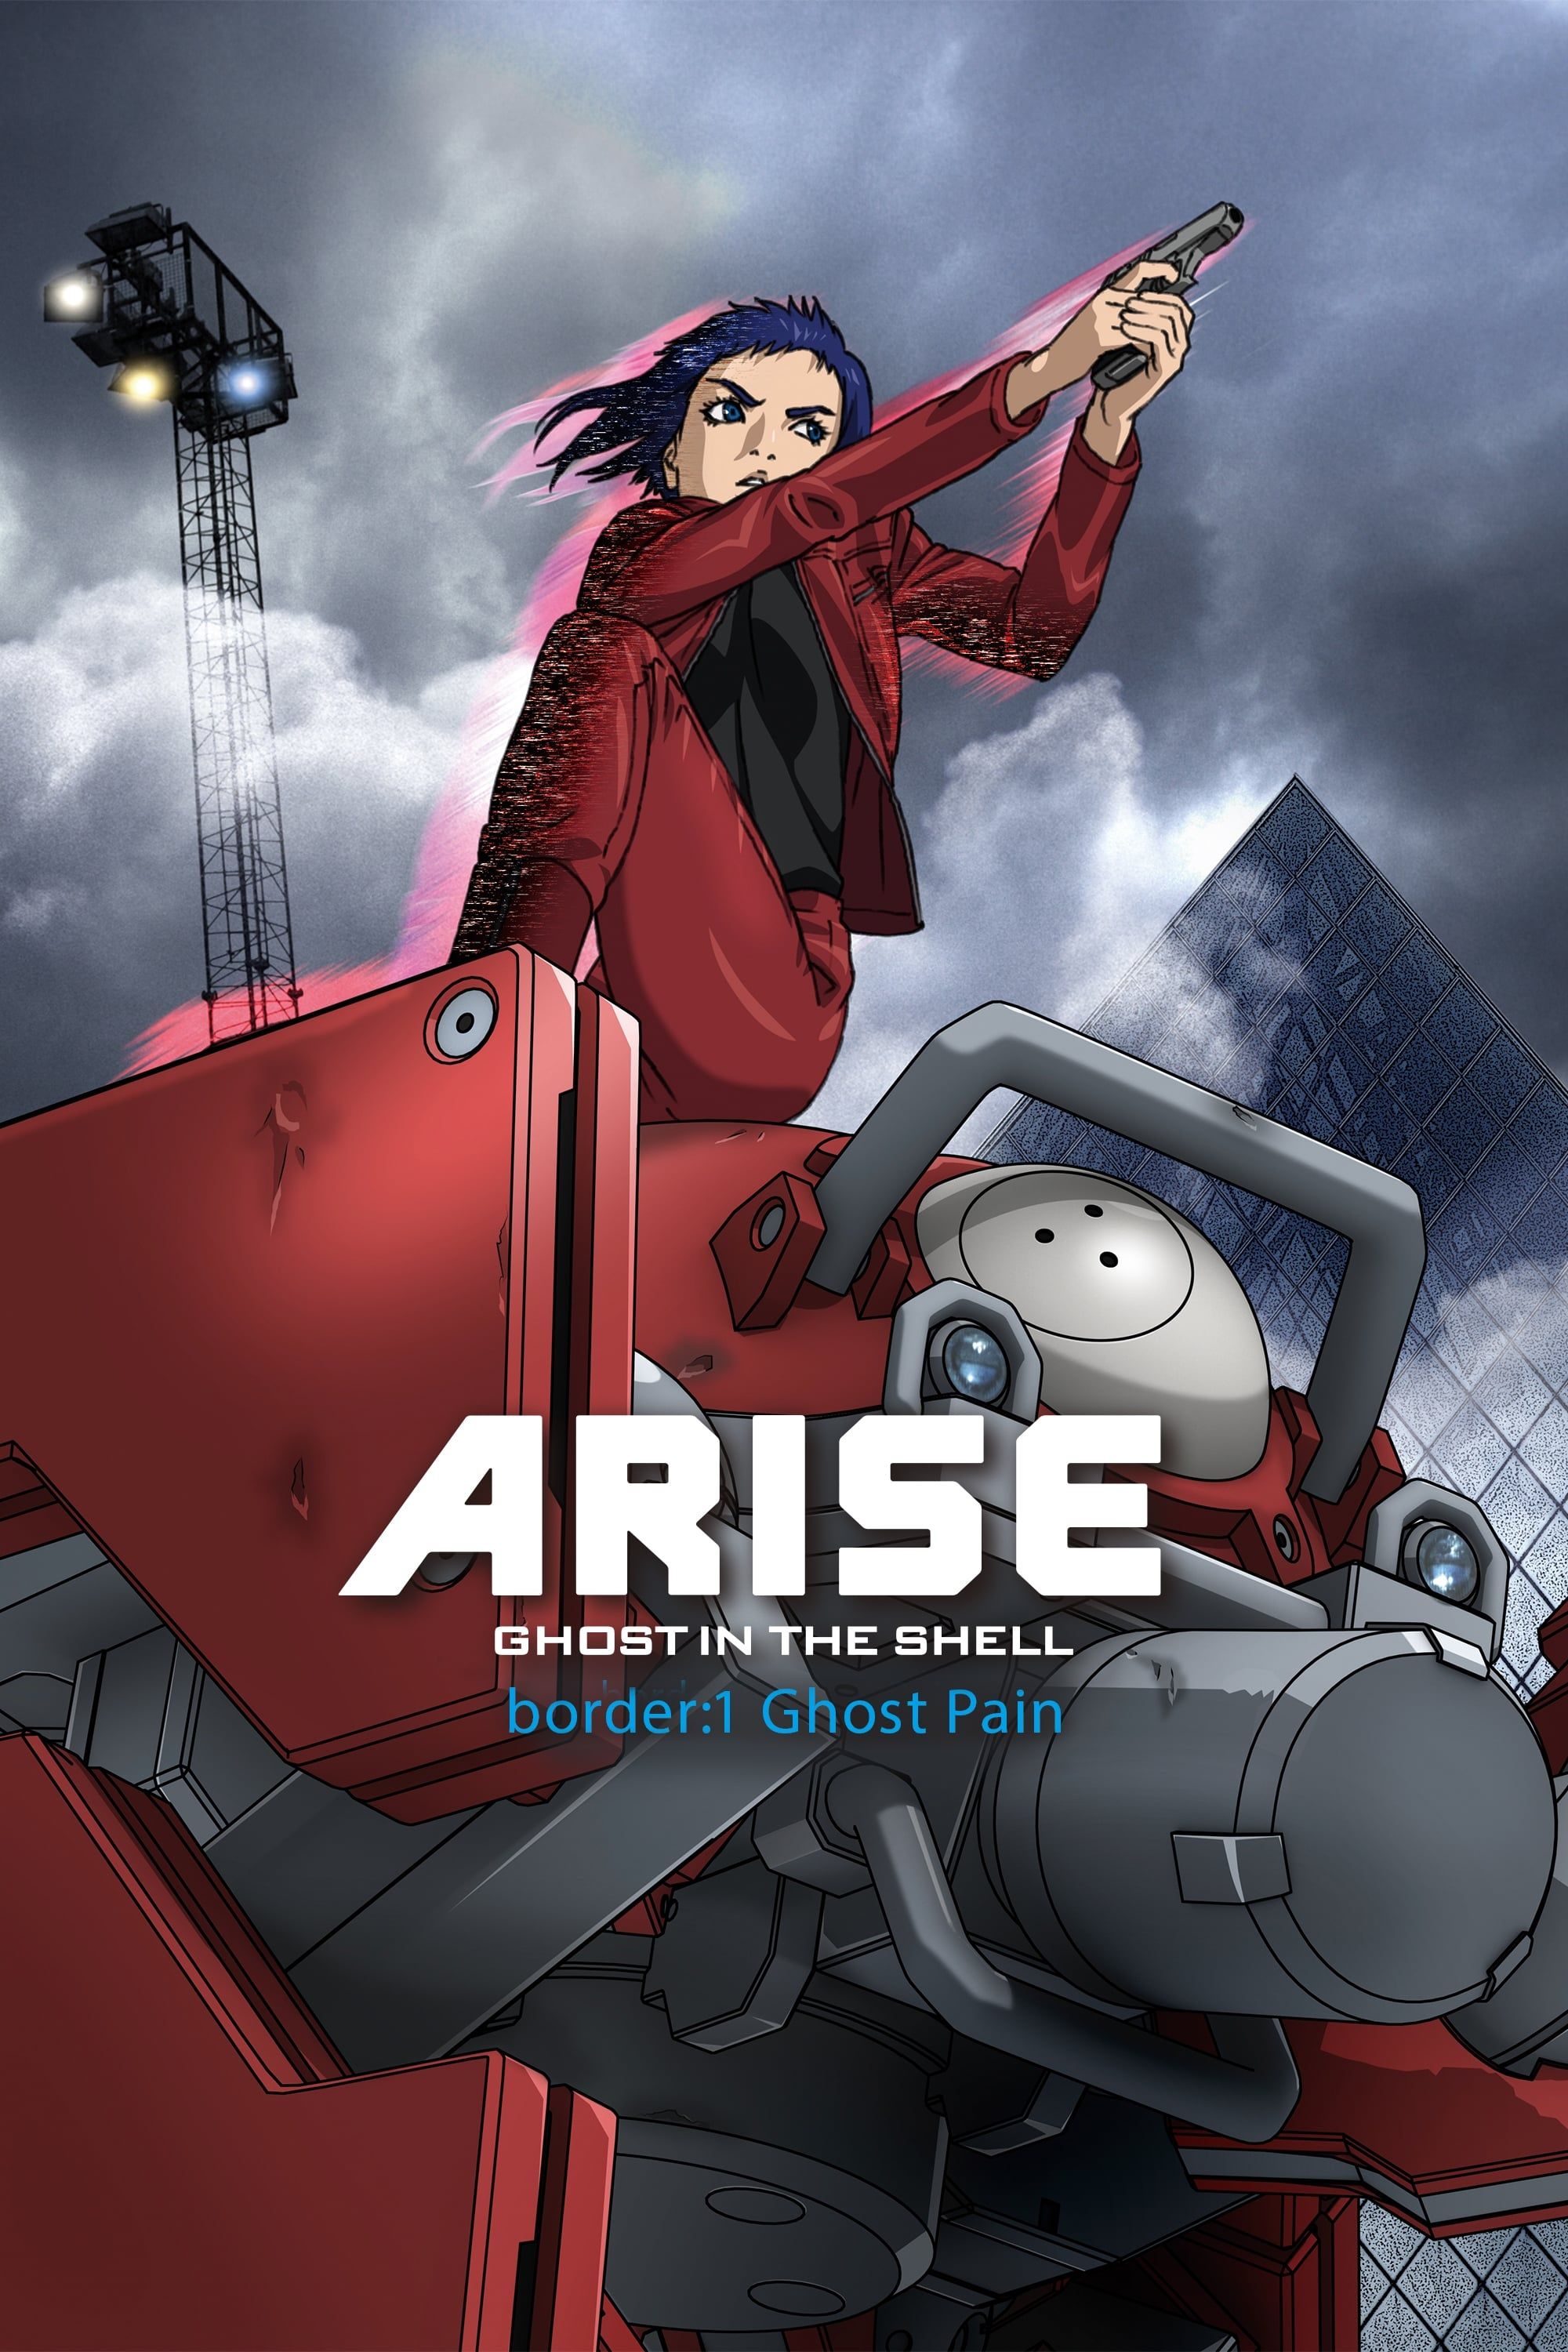 Ghost in the Shell: Arise - Border:4 Ghost Stands Alone (Dub) (Movie) Hot Anime